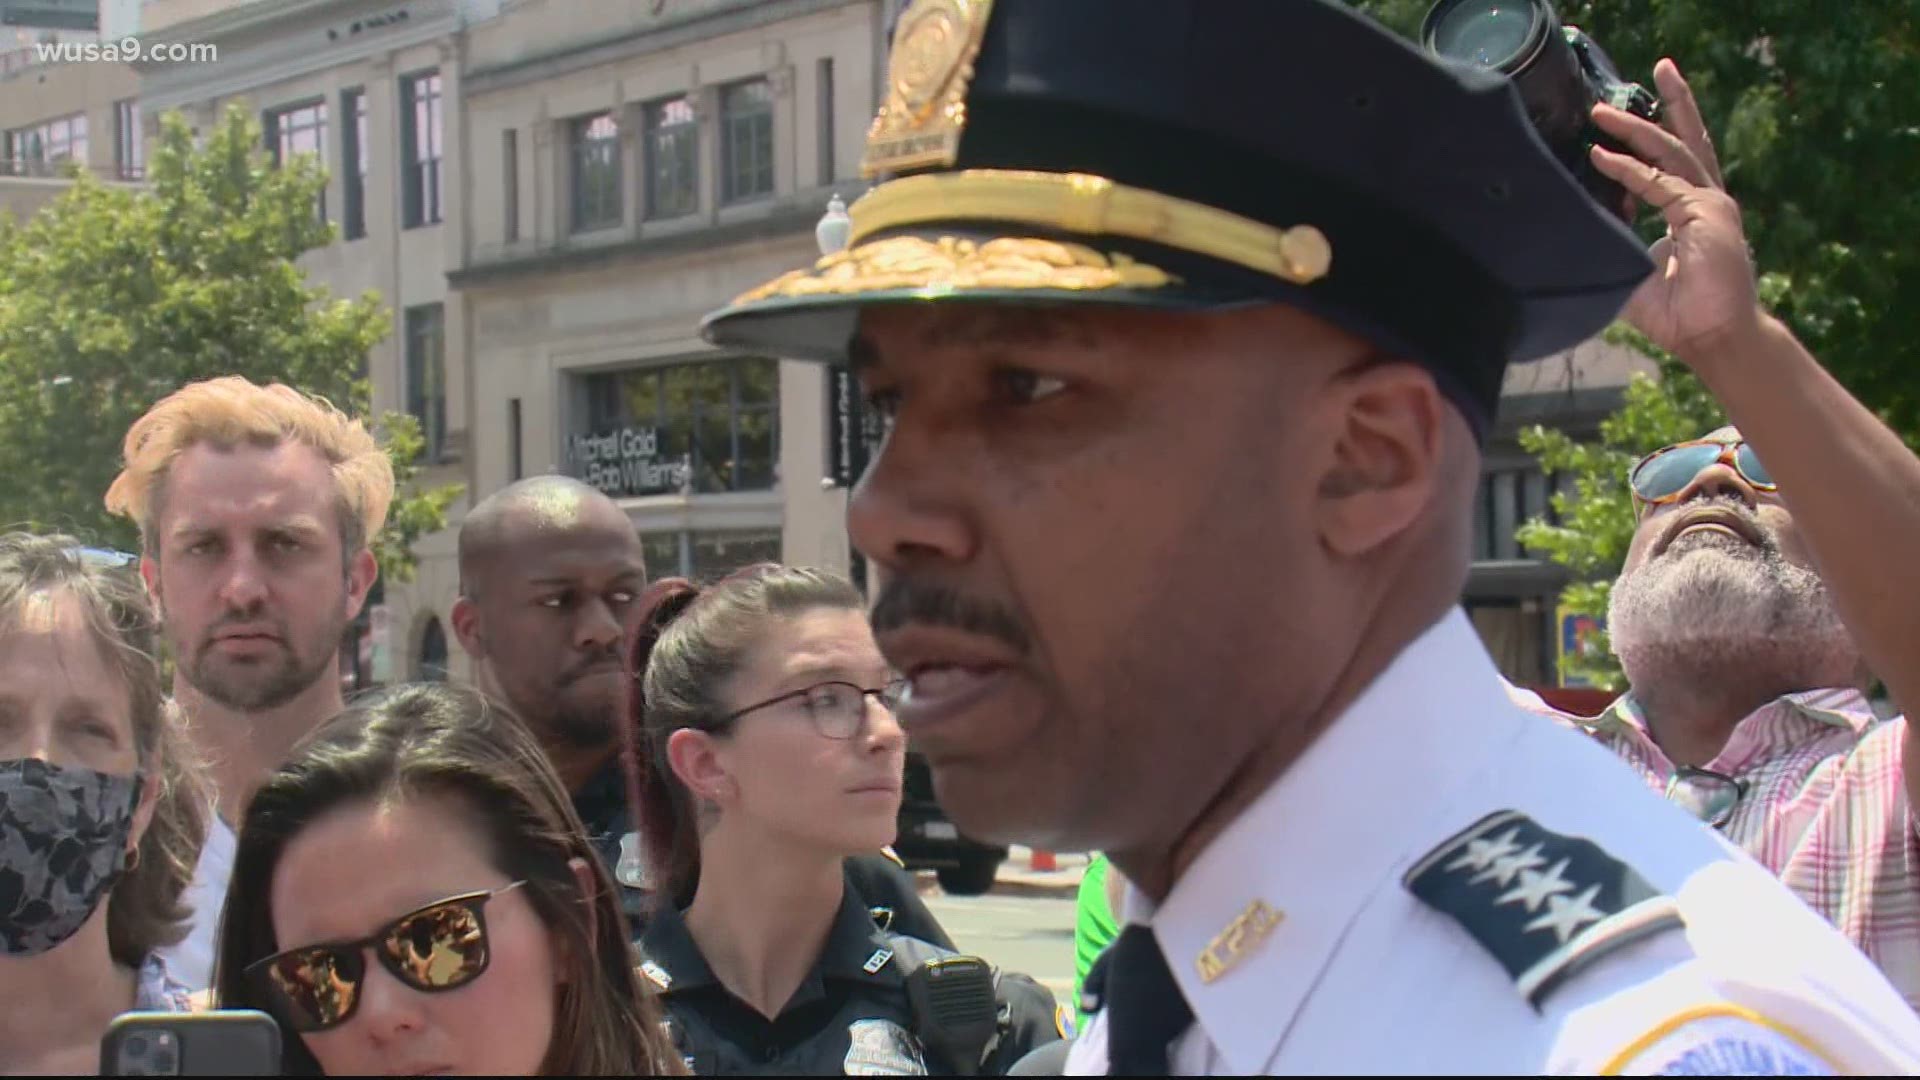 DC Police Chief Contee provides updates on the shooting at 14th St. and Riggs St. NW.